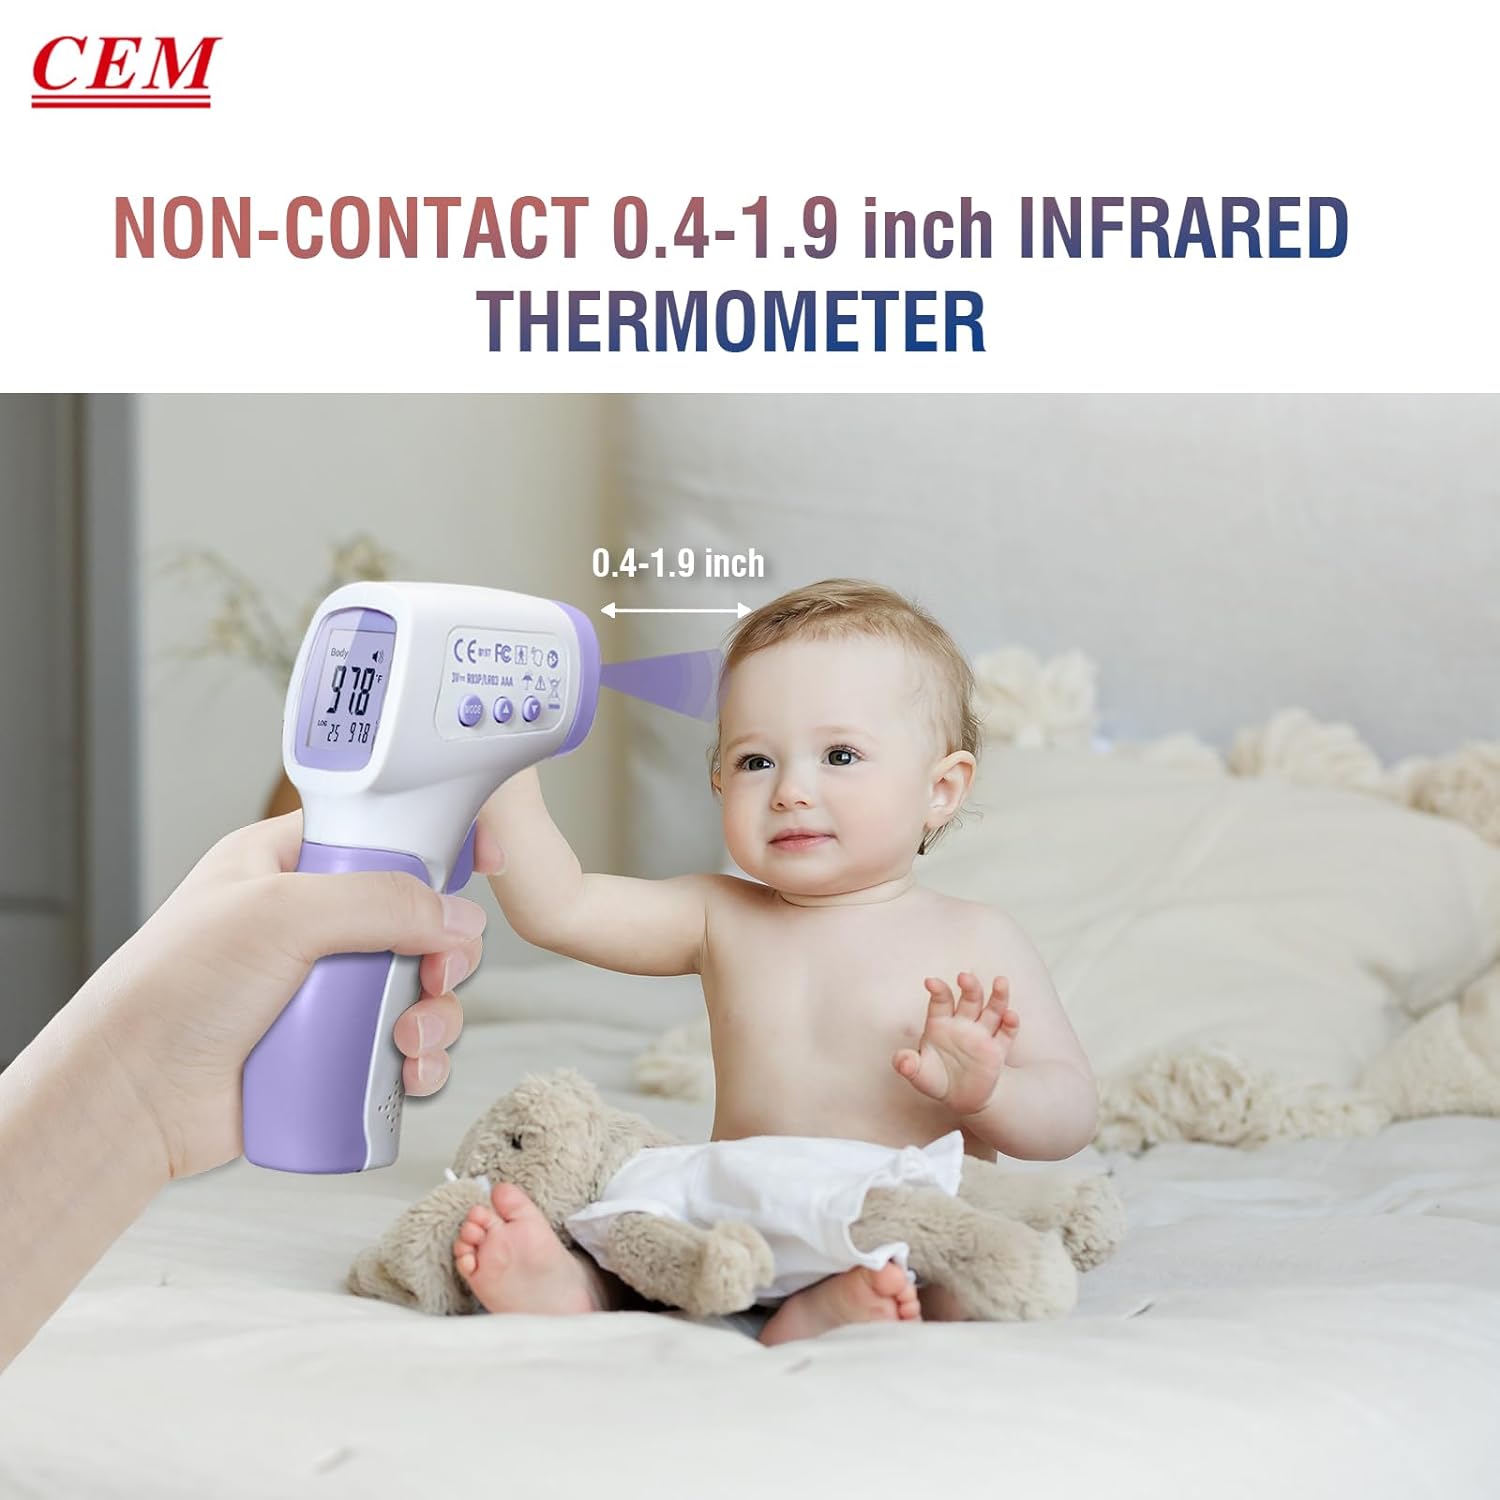 CEM DT-8806 Digital Thermometer for Adults and Kids, No Touch Forehead Thermometer for Baby, 2 in 1 Body Surface Mode Infrared Thermometer with Fever Alarm and Instant Accuracy Readings, Purple : Baby